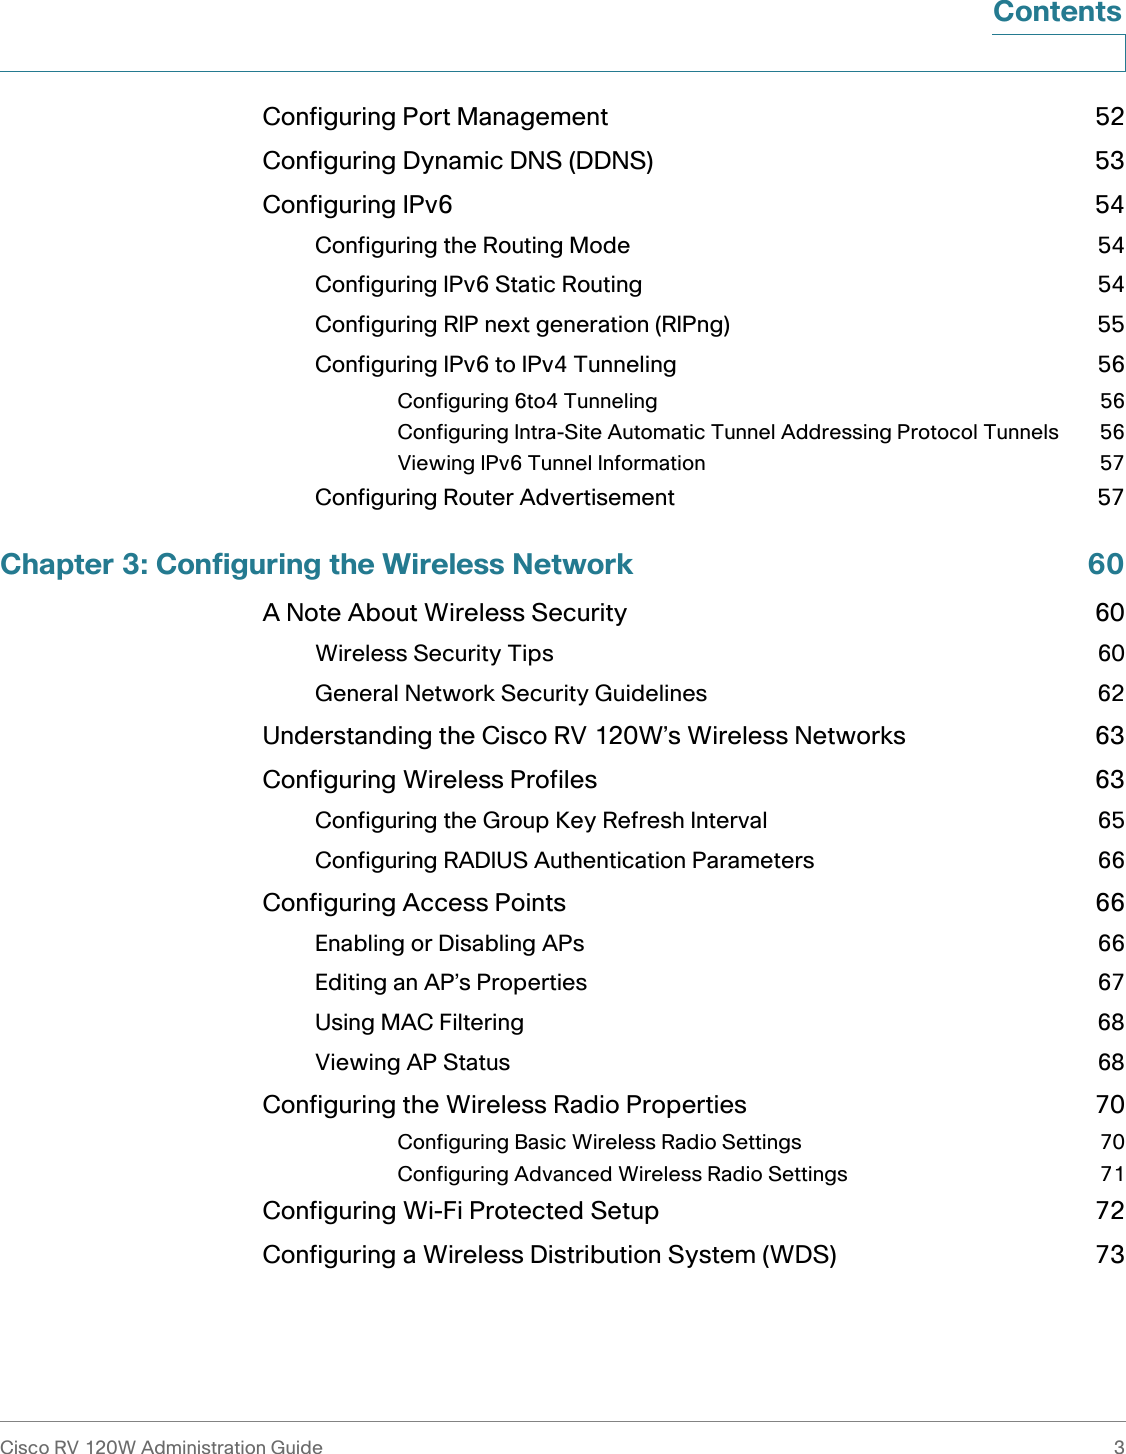 Cisco RV 120W Administration Guide 3 ContentsConfiguring Port Management 52Configuring Dynamic DNS (DDNS) 53Configuring IPv6 54Configuring the Routing Mode 54Configuring IPv6 Static Routing 54Configuring RIP next generation (RIPng) 55Configuring IPv6 to IPv4 Tunneling 56Configuring 6to4 Tunneling 56Configuring Intra-Site Automatic Tunnel Addressing Protocol Tunnels 56Viewing IPv6 Tunnel Information 57Configuring Router Advertisement 57Chapter 3: Configuring the Wireless Network 60A Note About Wireless Security 60Wireless Security Tips 60General Network Security Guidelines 62Understanding the Cisco RV 120W’s Wireless Networks 63Configuring Wireless Profiles 63Configuring the Group Key Refresh Interval 65Configuring RADIUS Authentication Parameters 66Configuring Access Points 66Enabling or Disabling APs 66Editing an AP’s Properties 67Using MAC Filtering 68Viewing AP Status 68Configuring the Wireless Radio Properties 70Configuring Basic Wireless Radio Settings 70Configuring Advanced Wireless Radio Settings 71Configuring Wi-Fi Protected Setup 72Configuring a Wireless Distribution System (WDS) 73